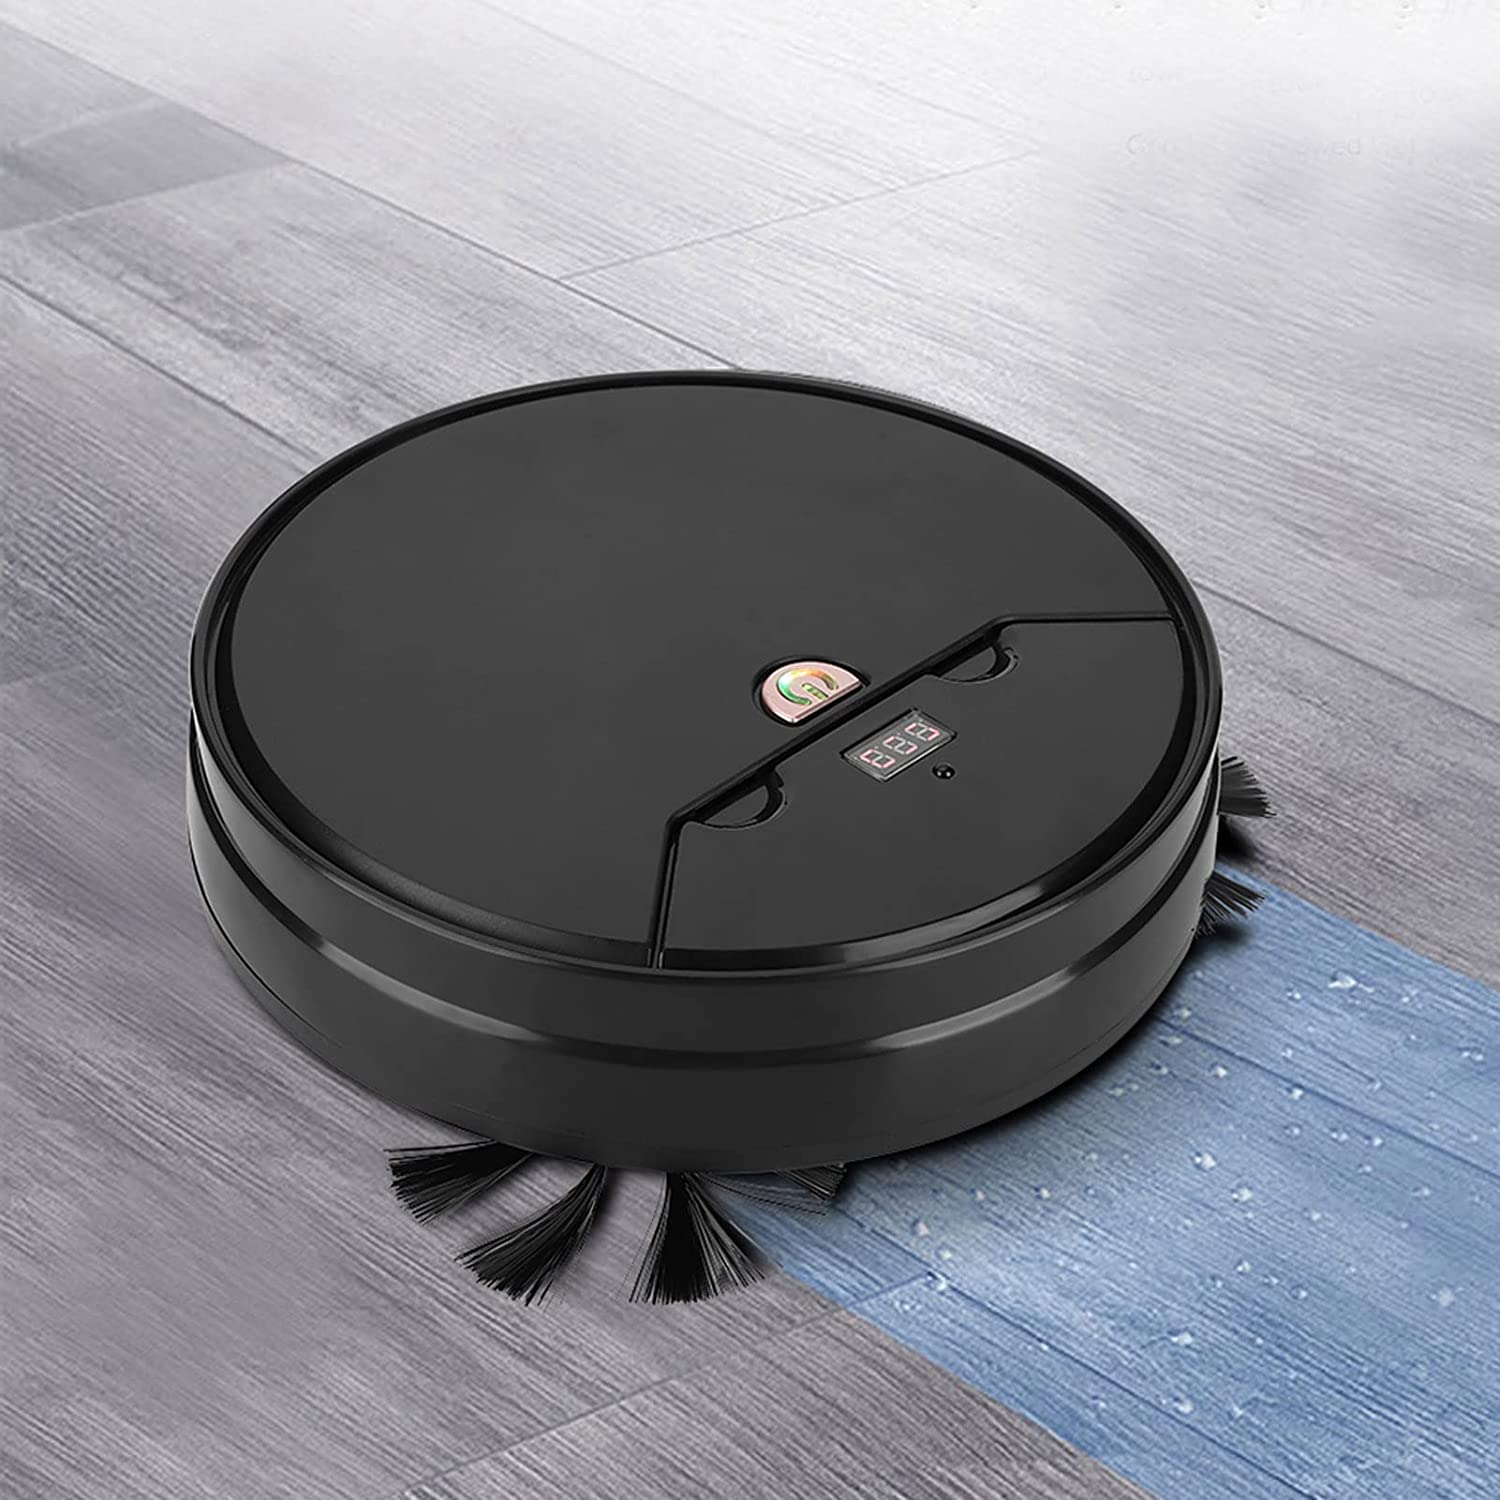 This Slim Robot Vacuum and Mop Cleaner Is 72% Off on